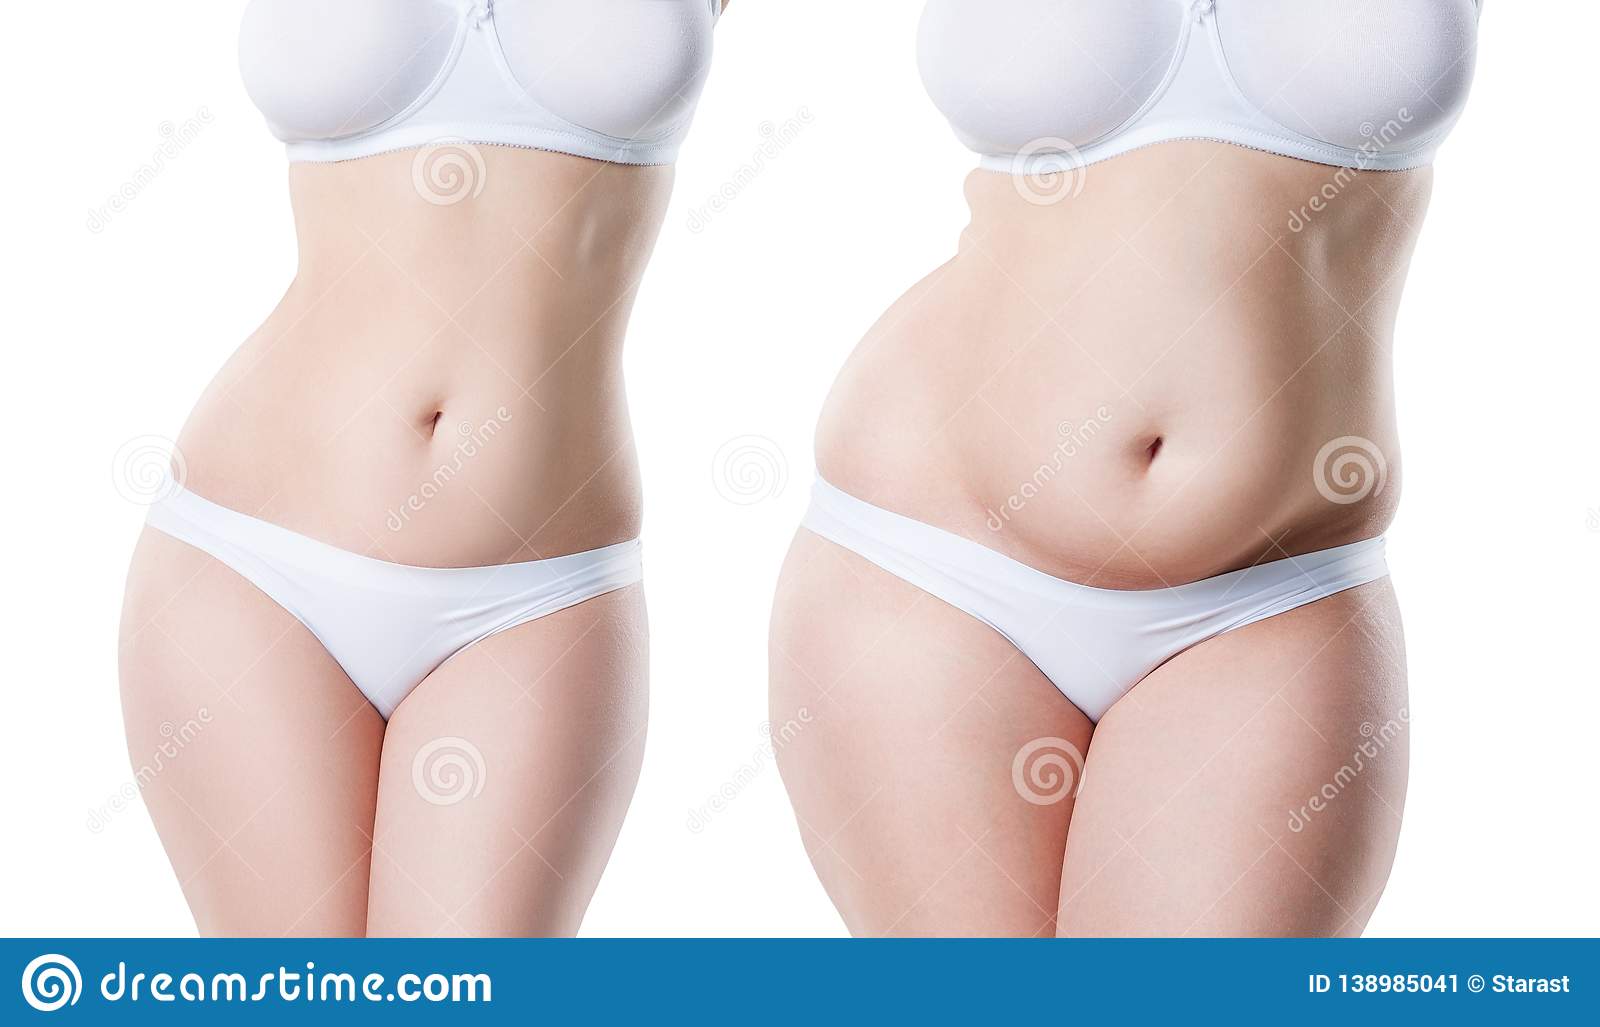 woman-s-body-weight-loss-isolated-white-background-plastic-surgery-concept-138985041.jpg